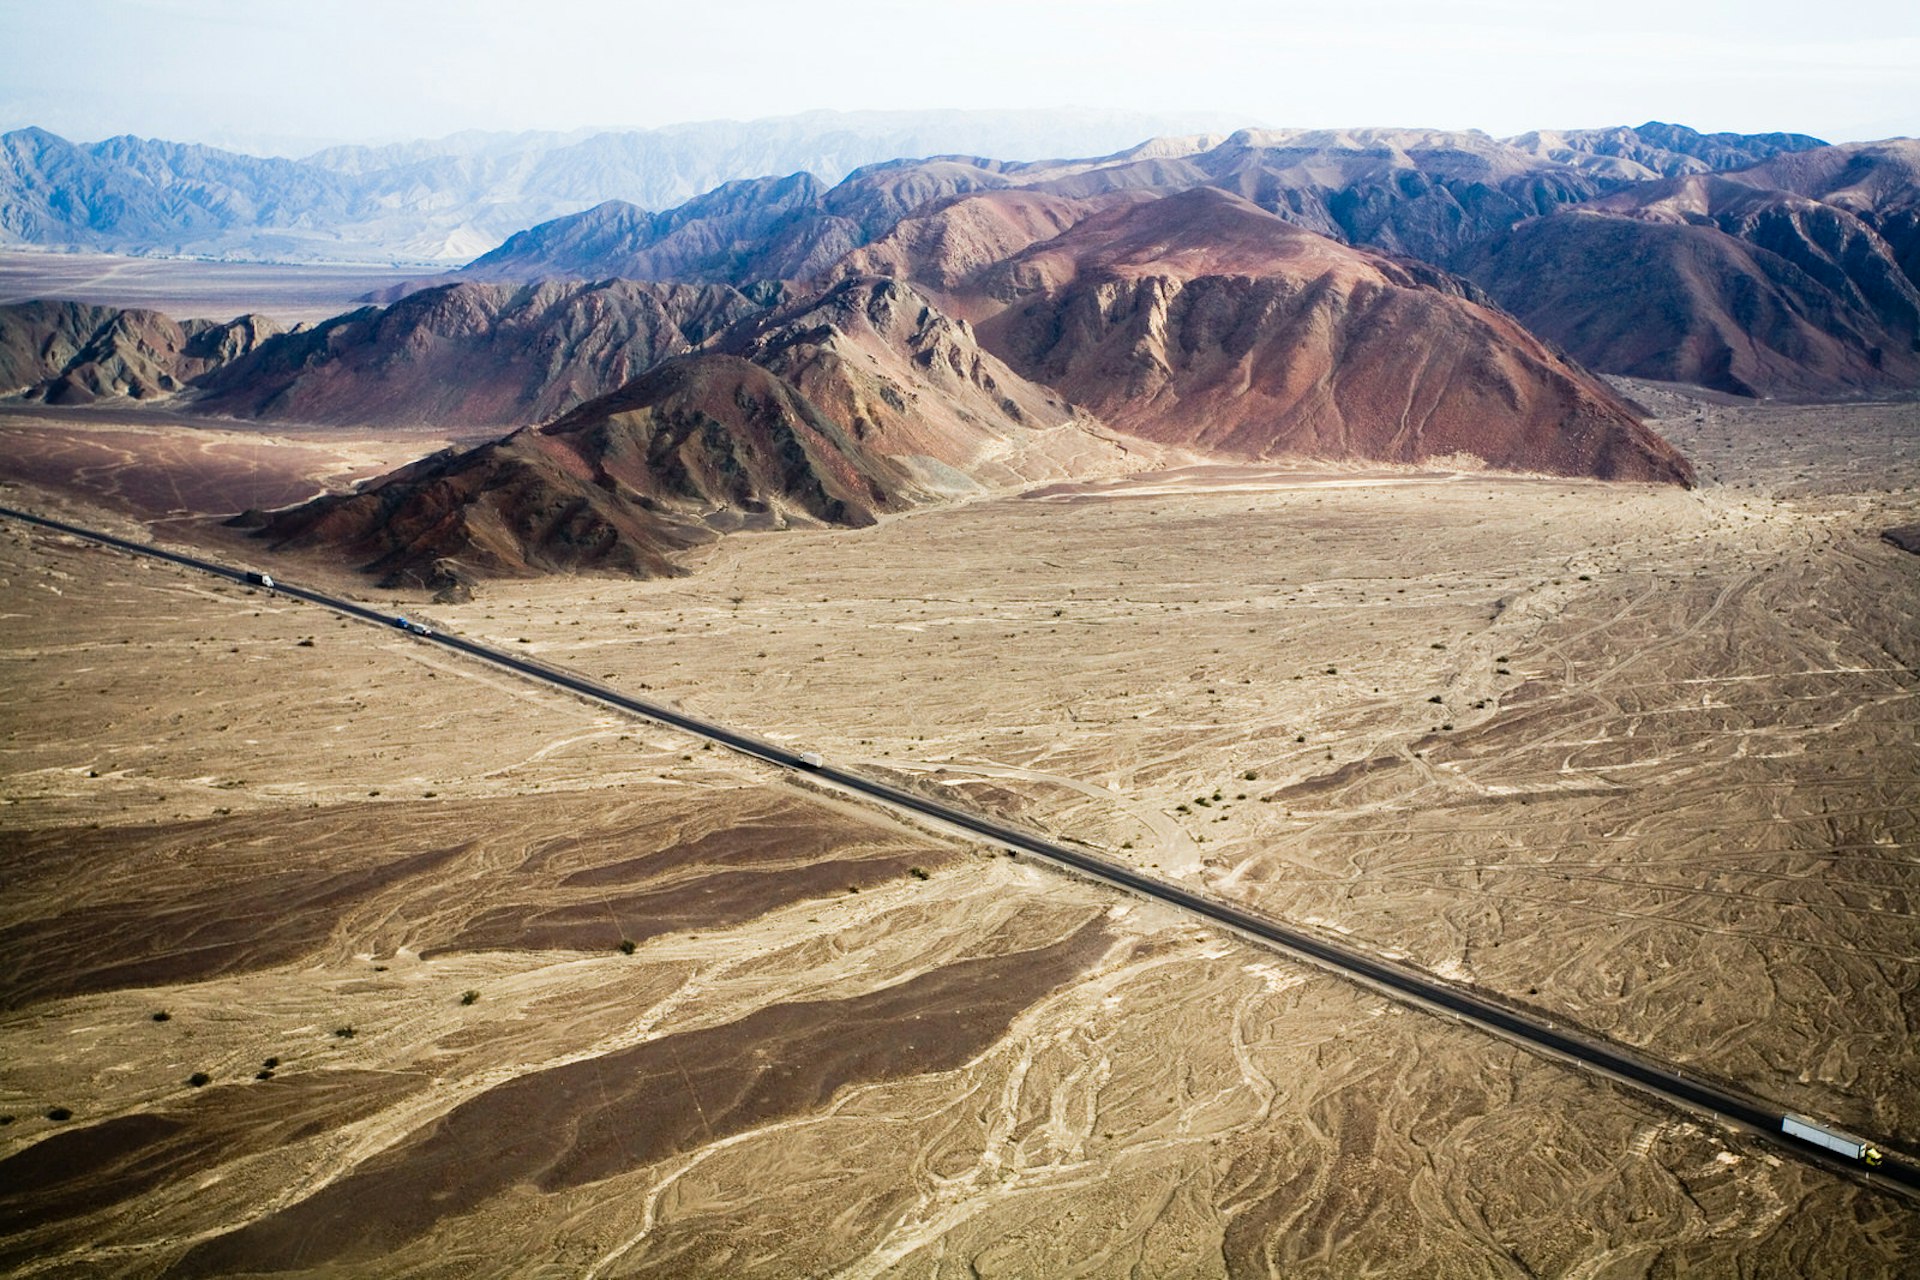 A stretch of the Pan-American Highway near Nazca, Peru © PIKSEL / Getty Images